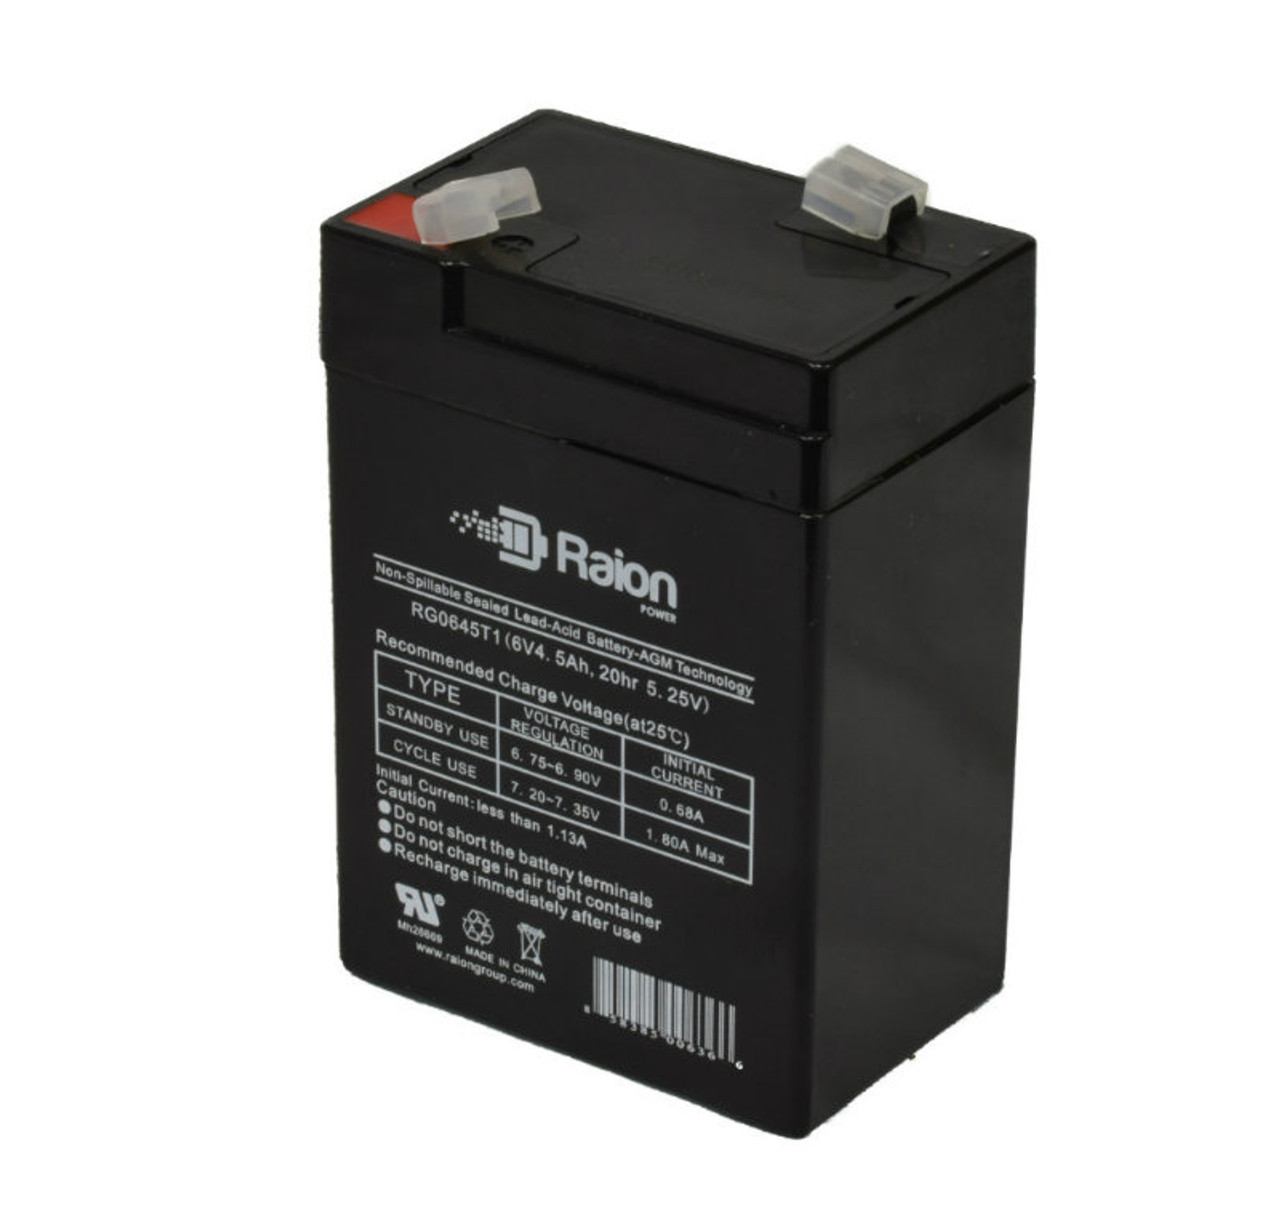 Raion Power RG0645T1 6V 4.5Ah Replacement Battery Cartridge for Chloride 9F4Y